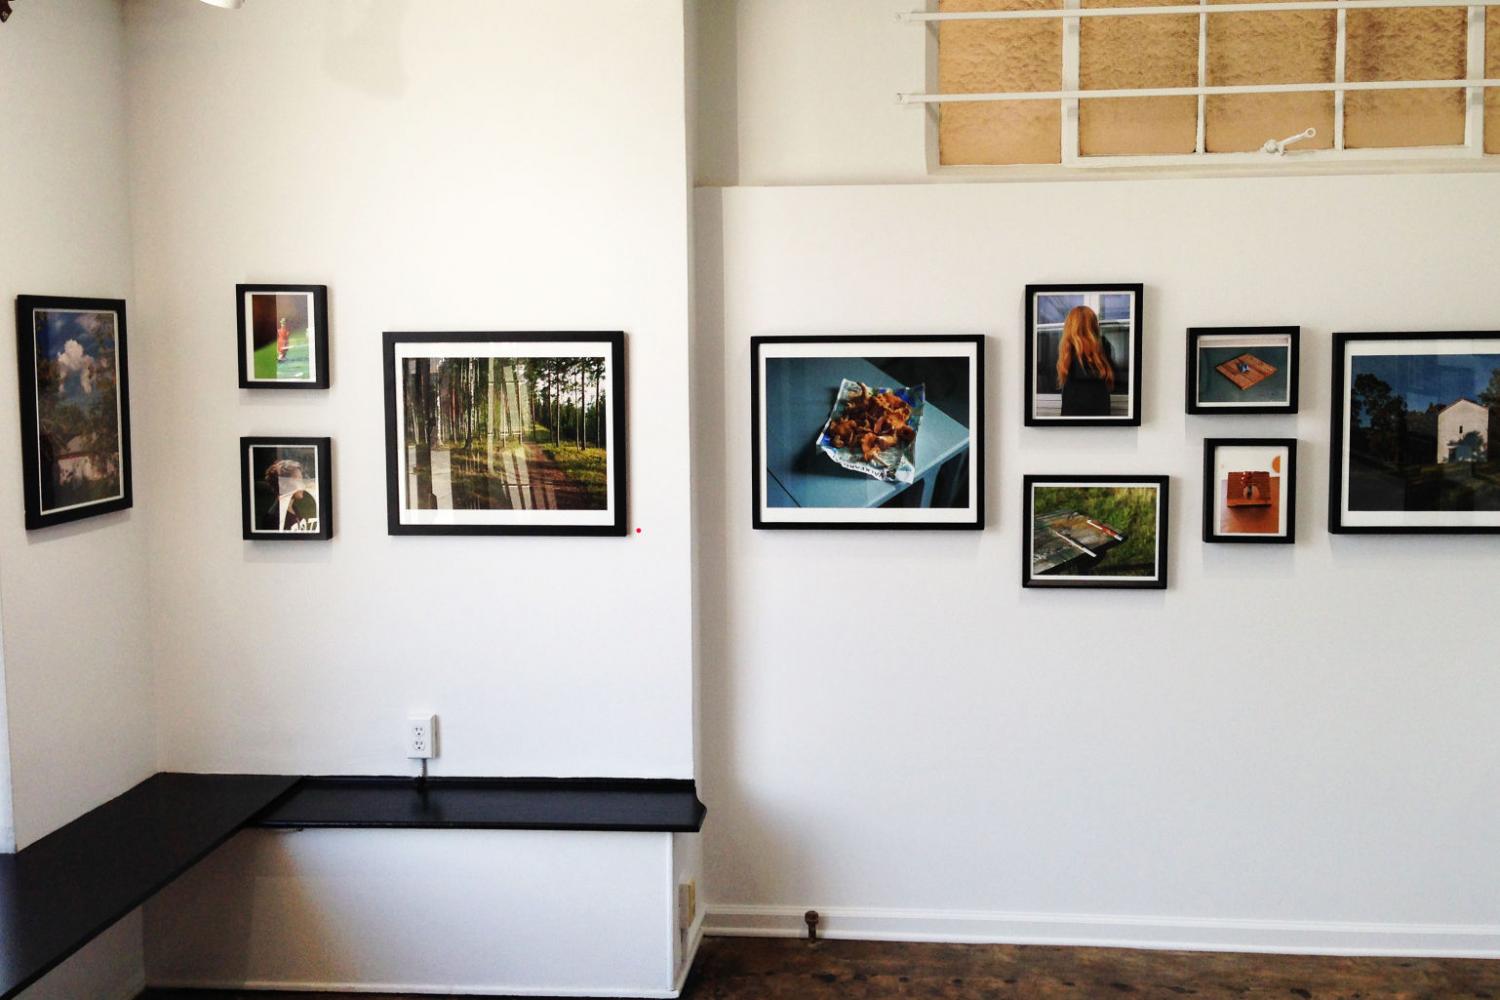 There and back again; Fine arts faculty shows photography